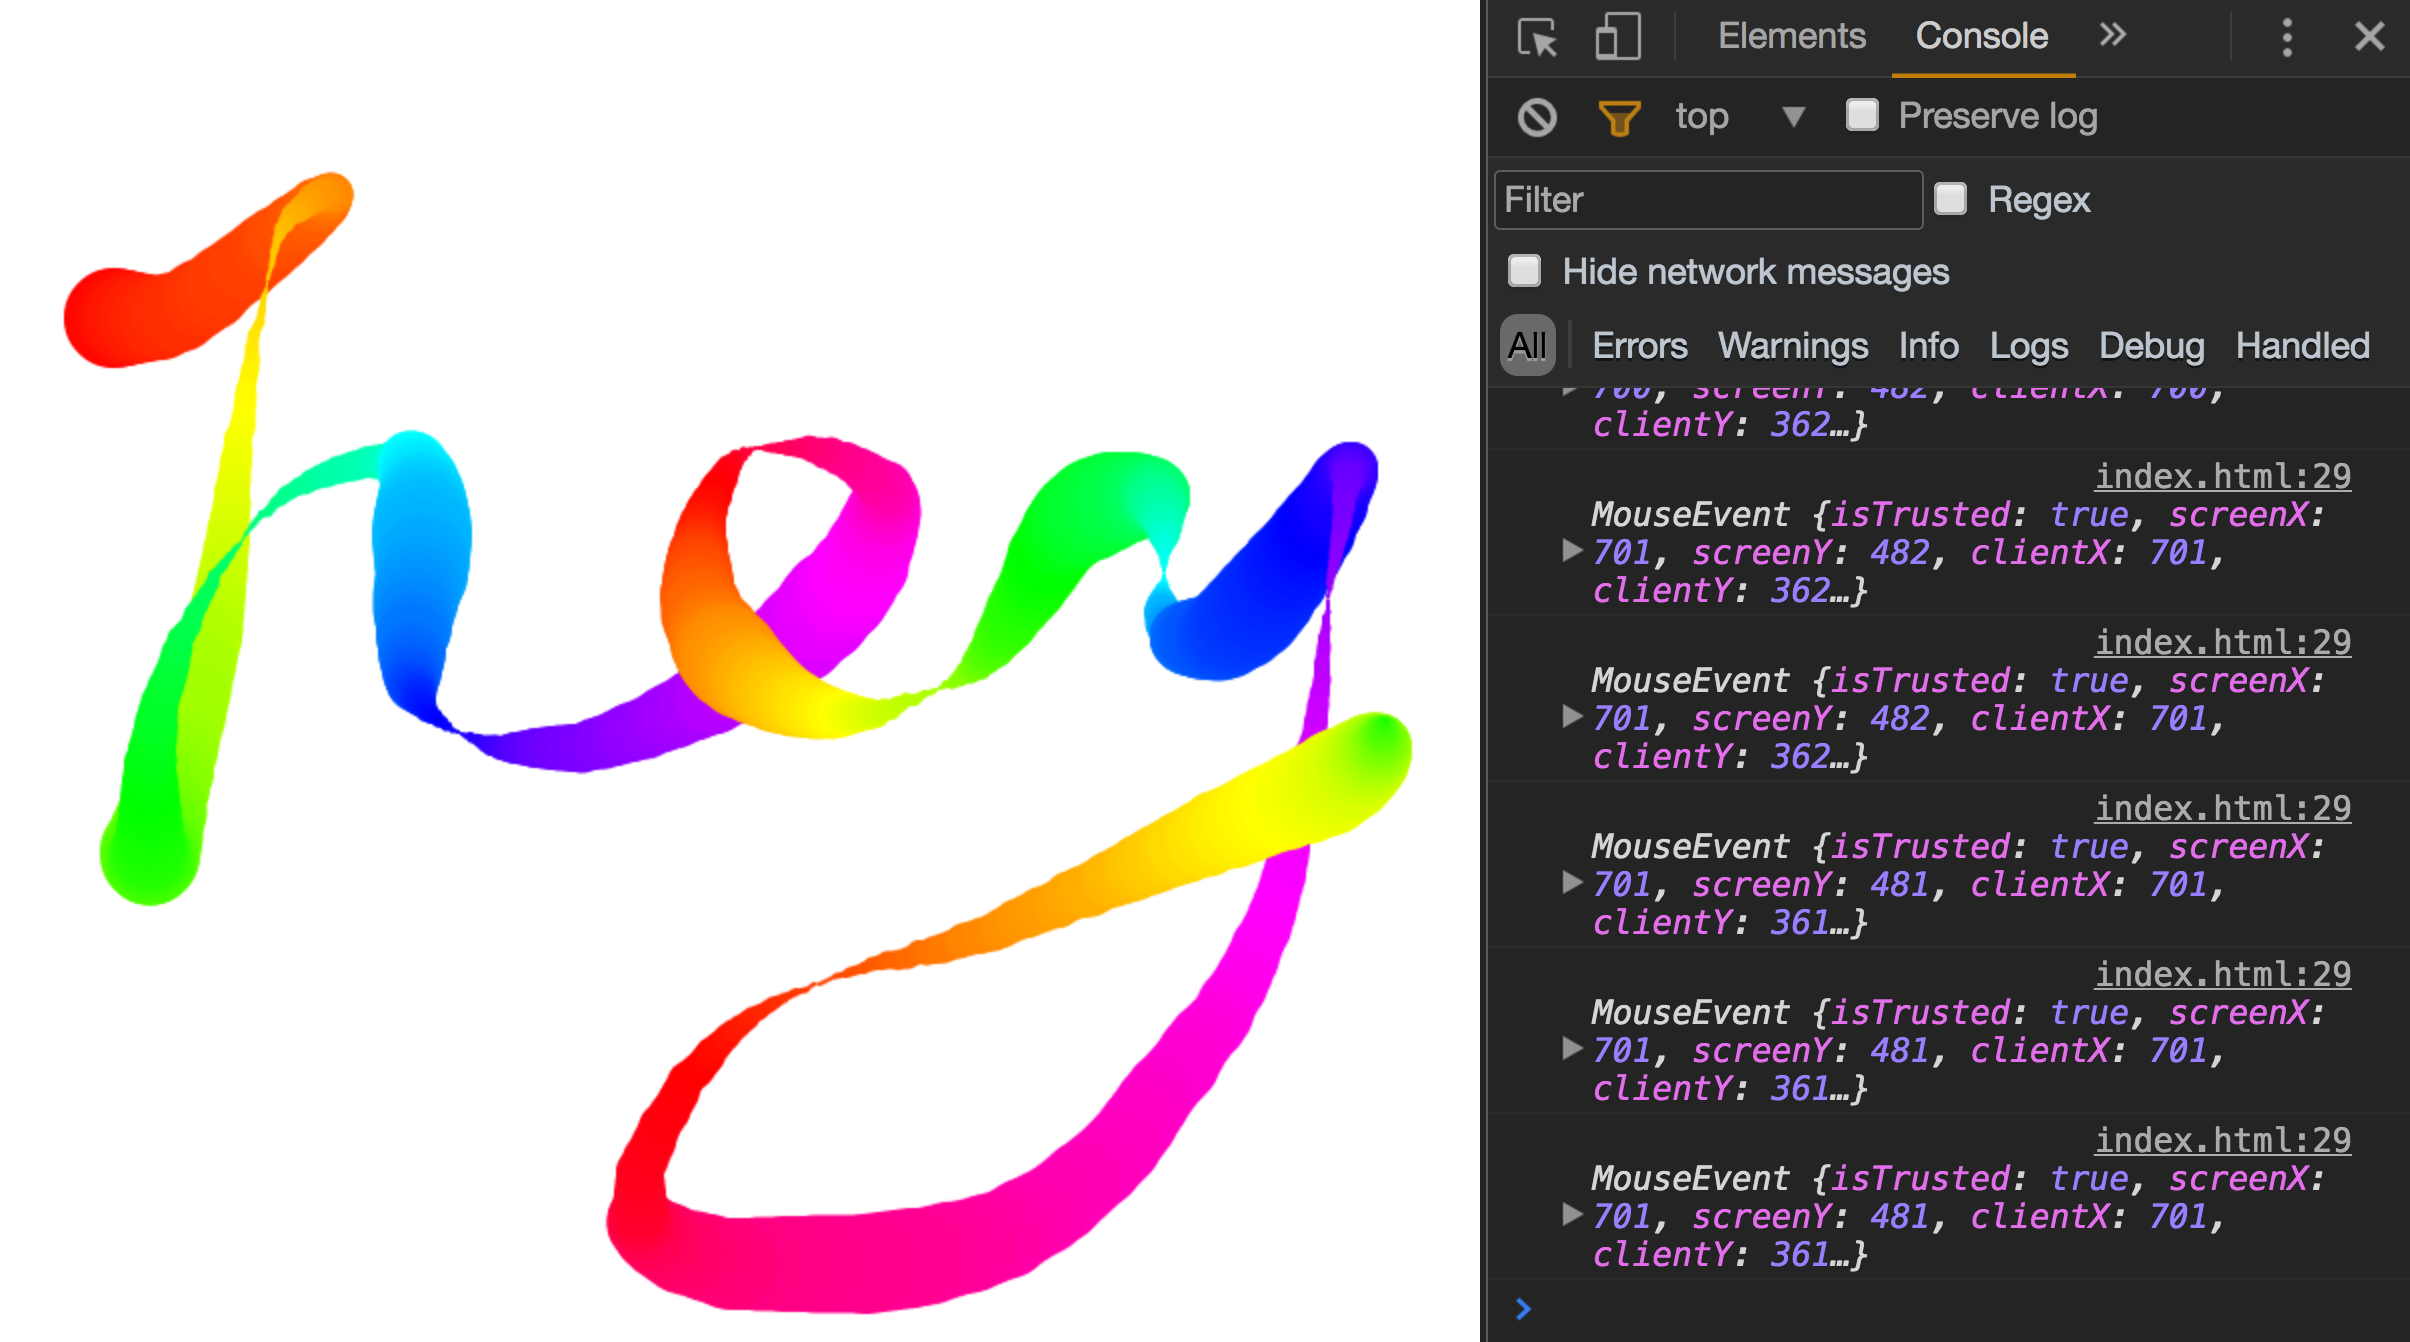 Fun with HTML5 Canvas